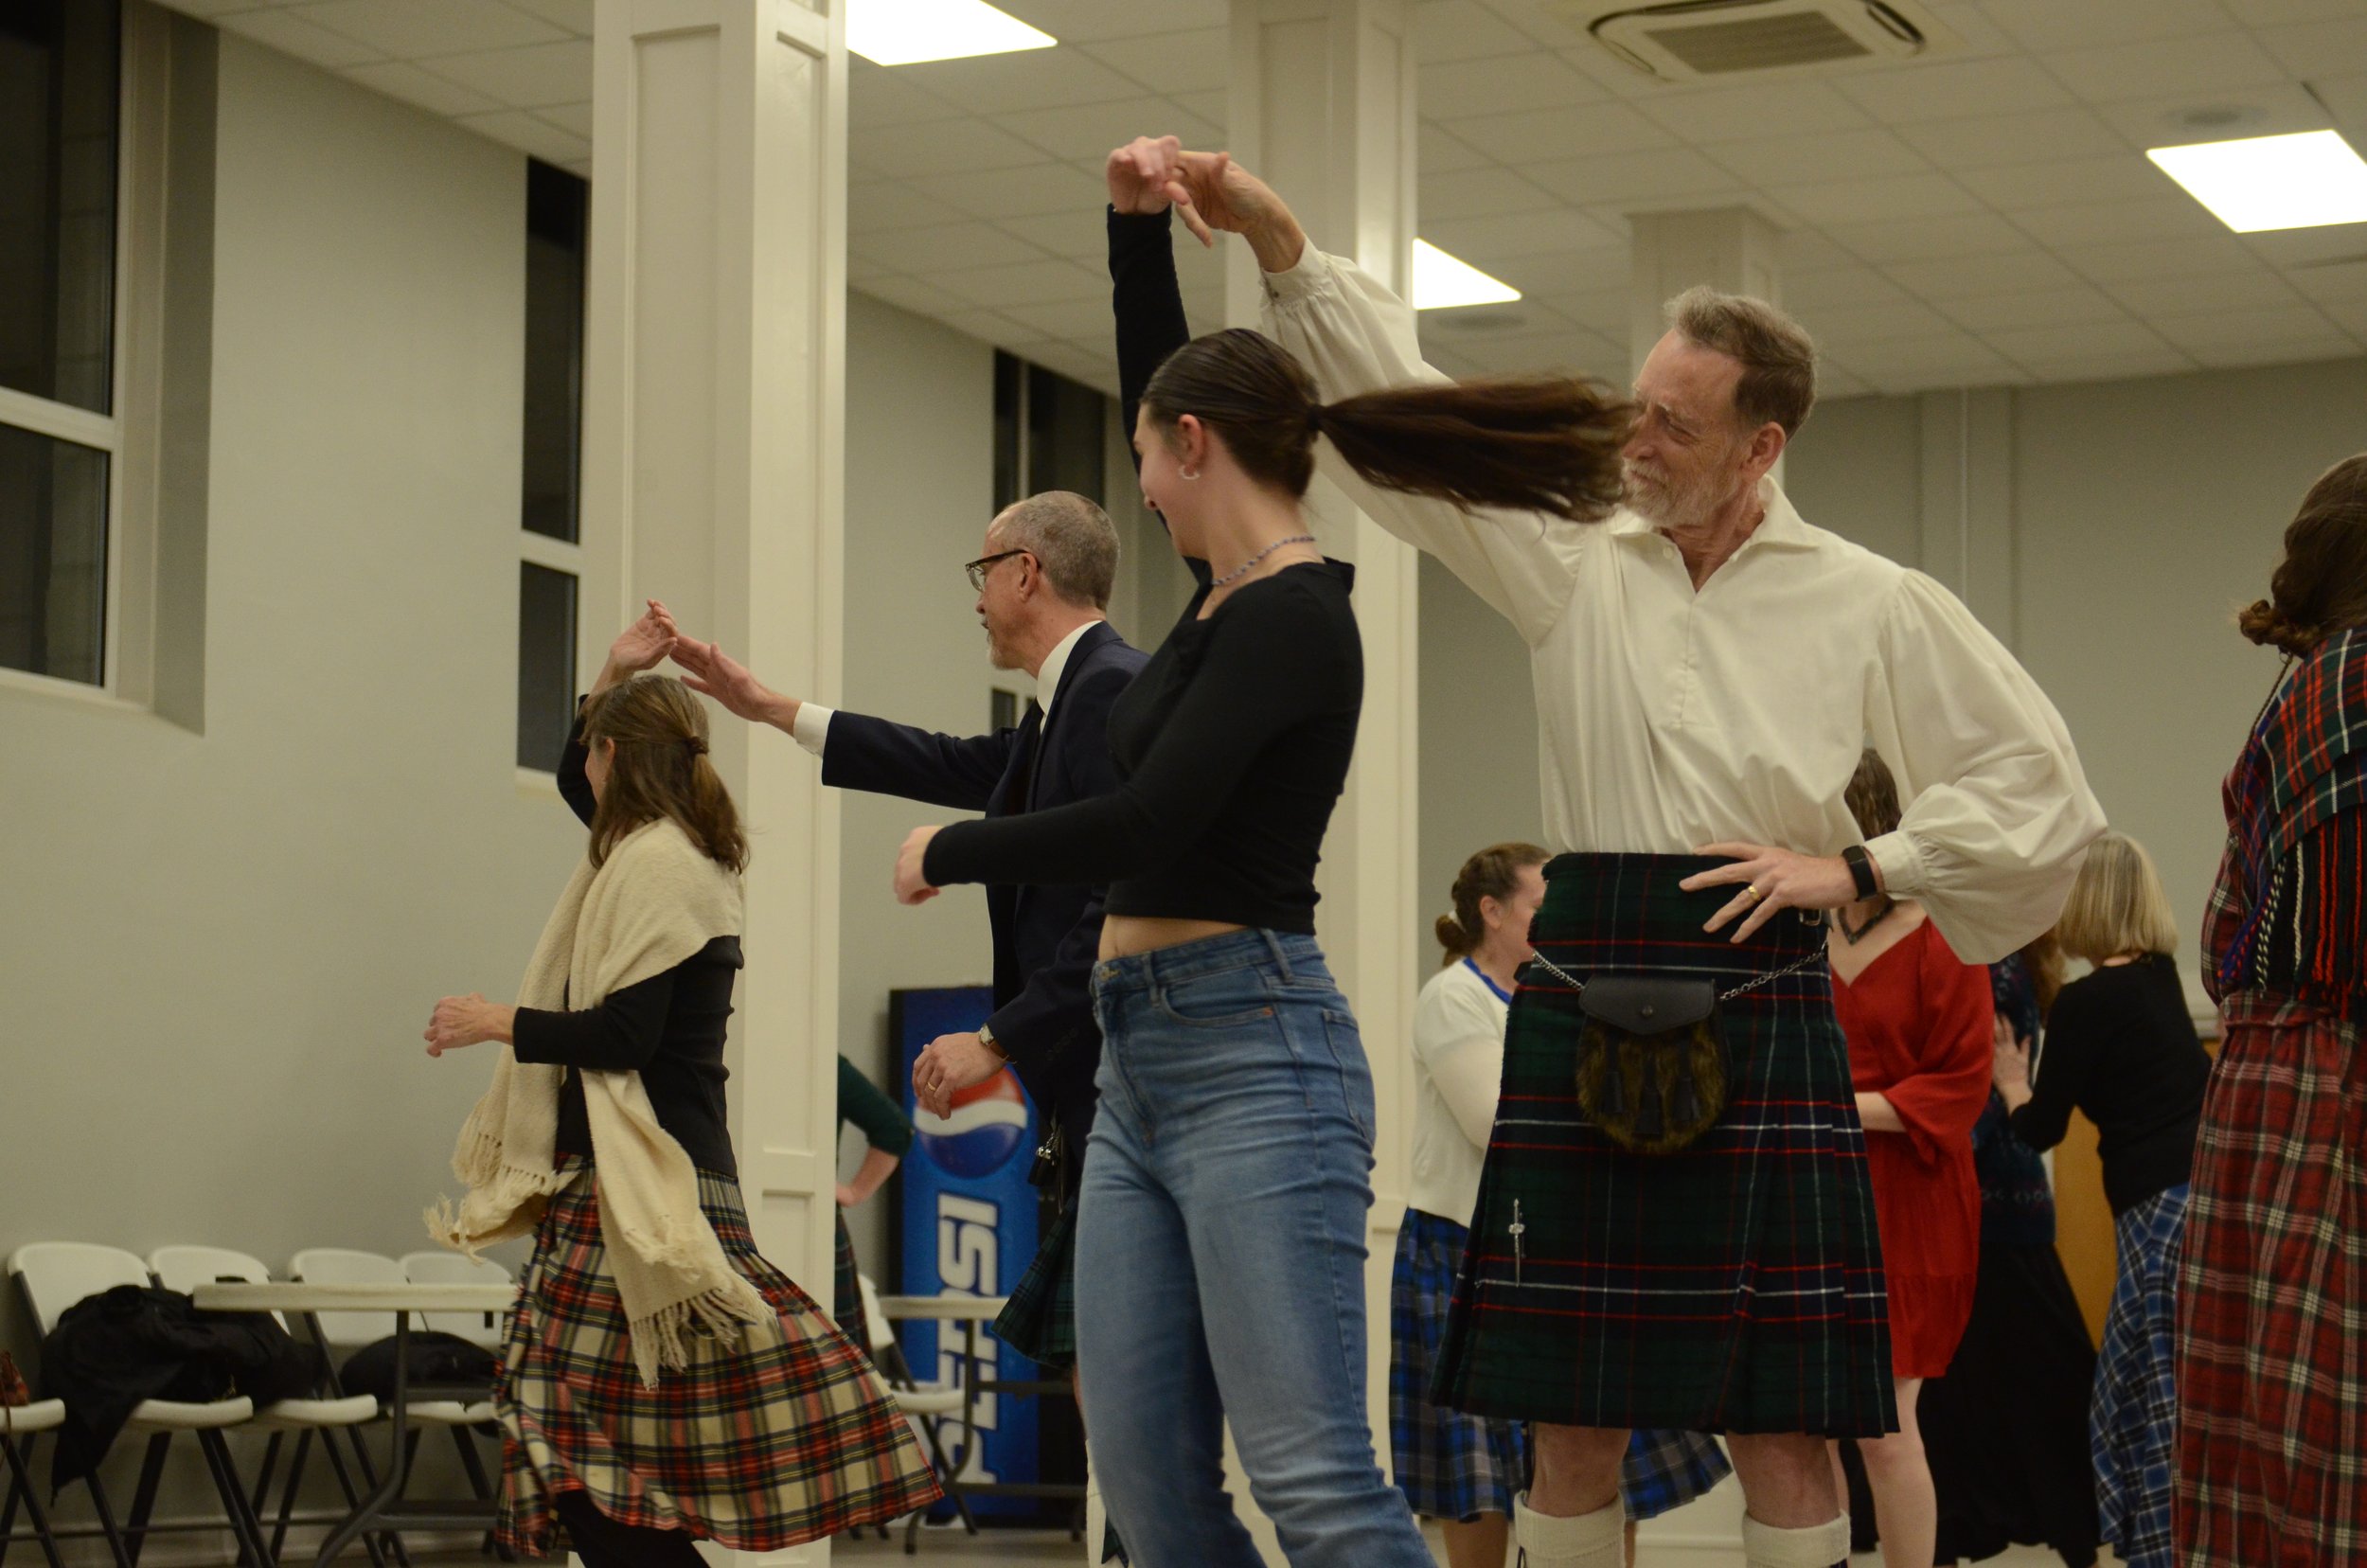 FCC's Burns Night Supports Mission